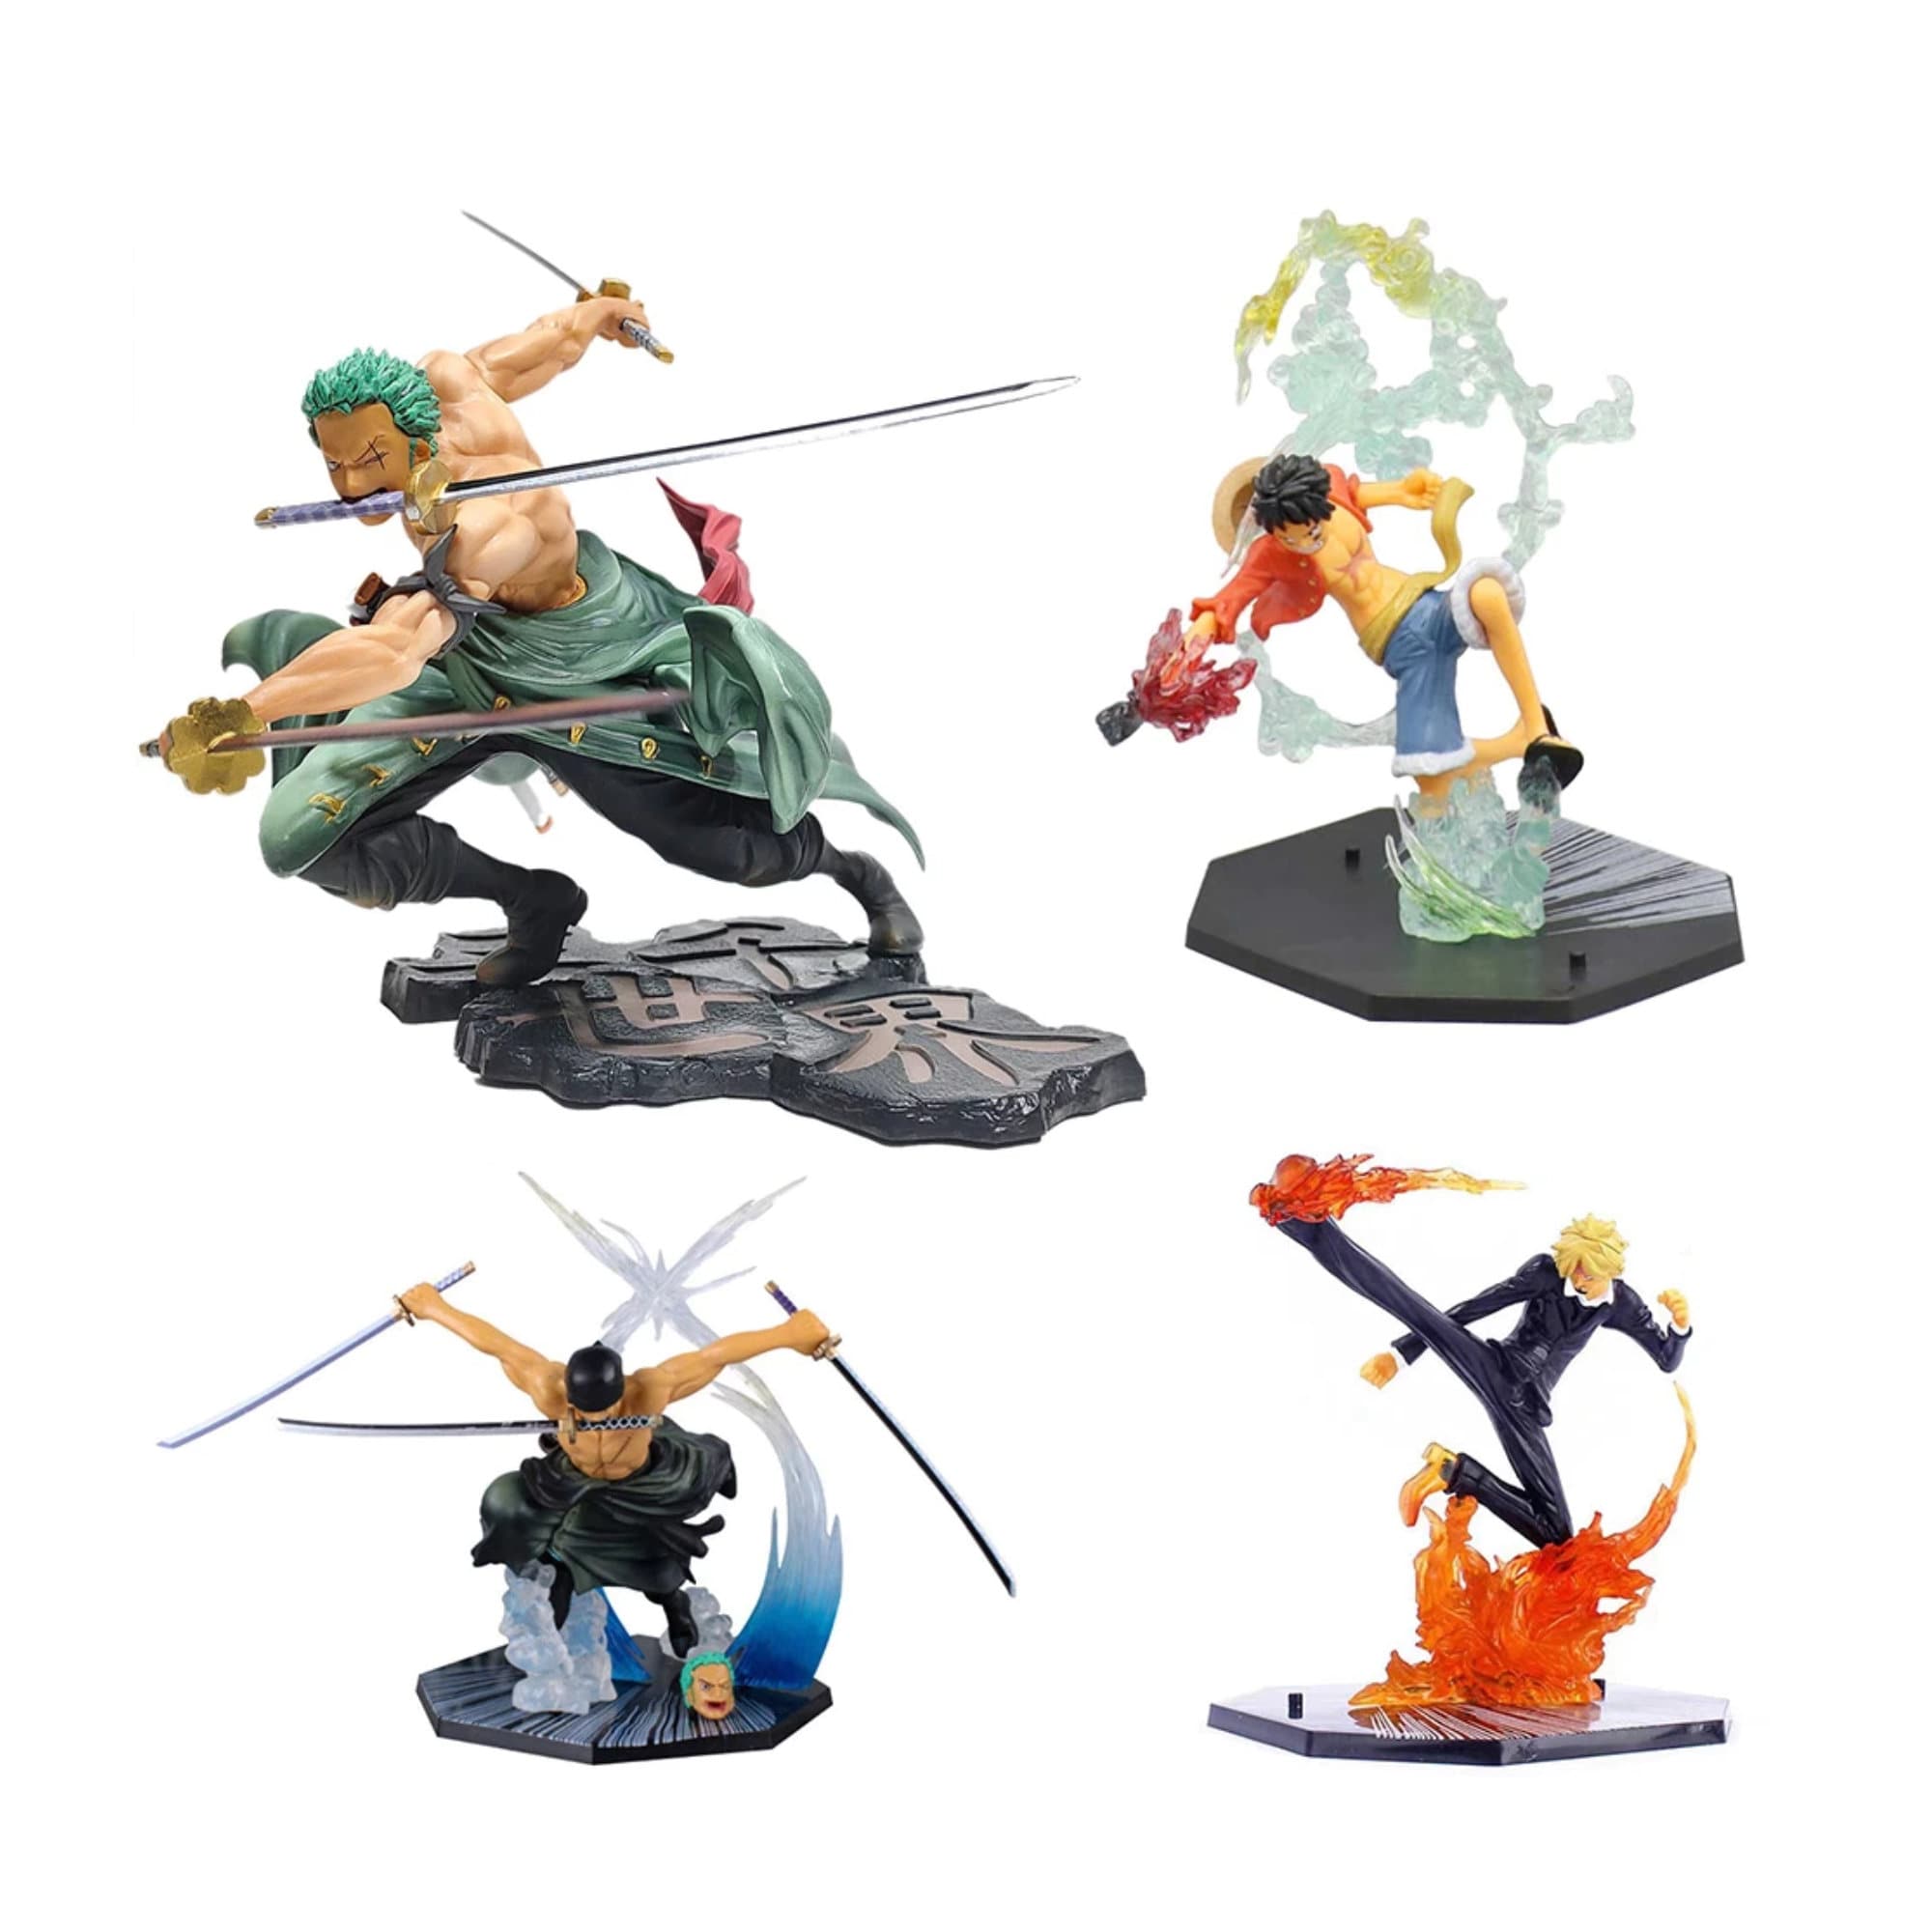 Juntful ONE PIECE Model Toy With Action Effects Kimono Roronoa Zoro Anime  Figures Collectibles For Japanese Anime Fans 20cm New | One Piece Model Toy  With Action Effects Kimono Roronoa Zoro Anime